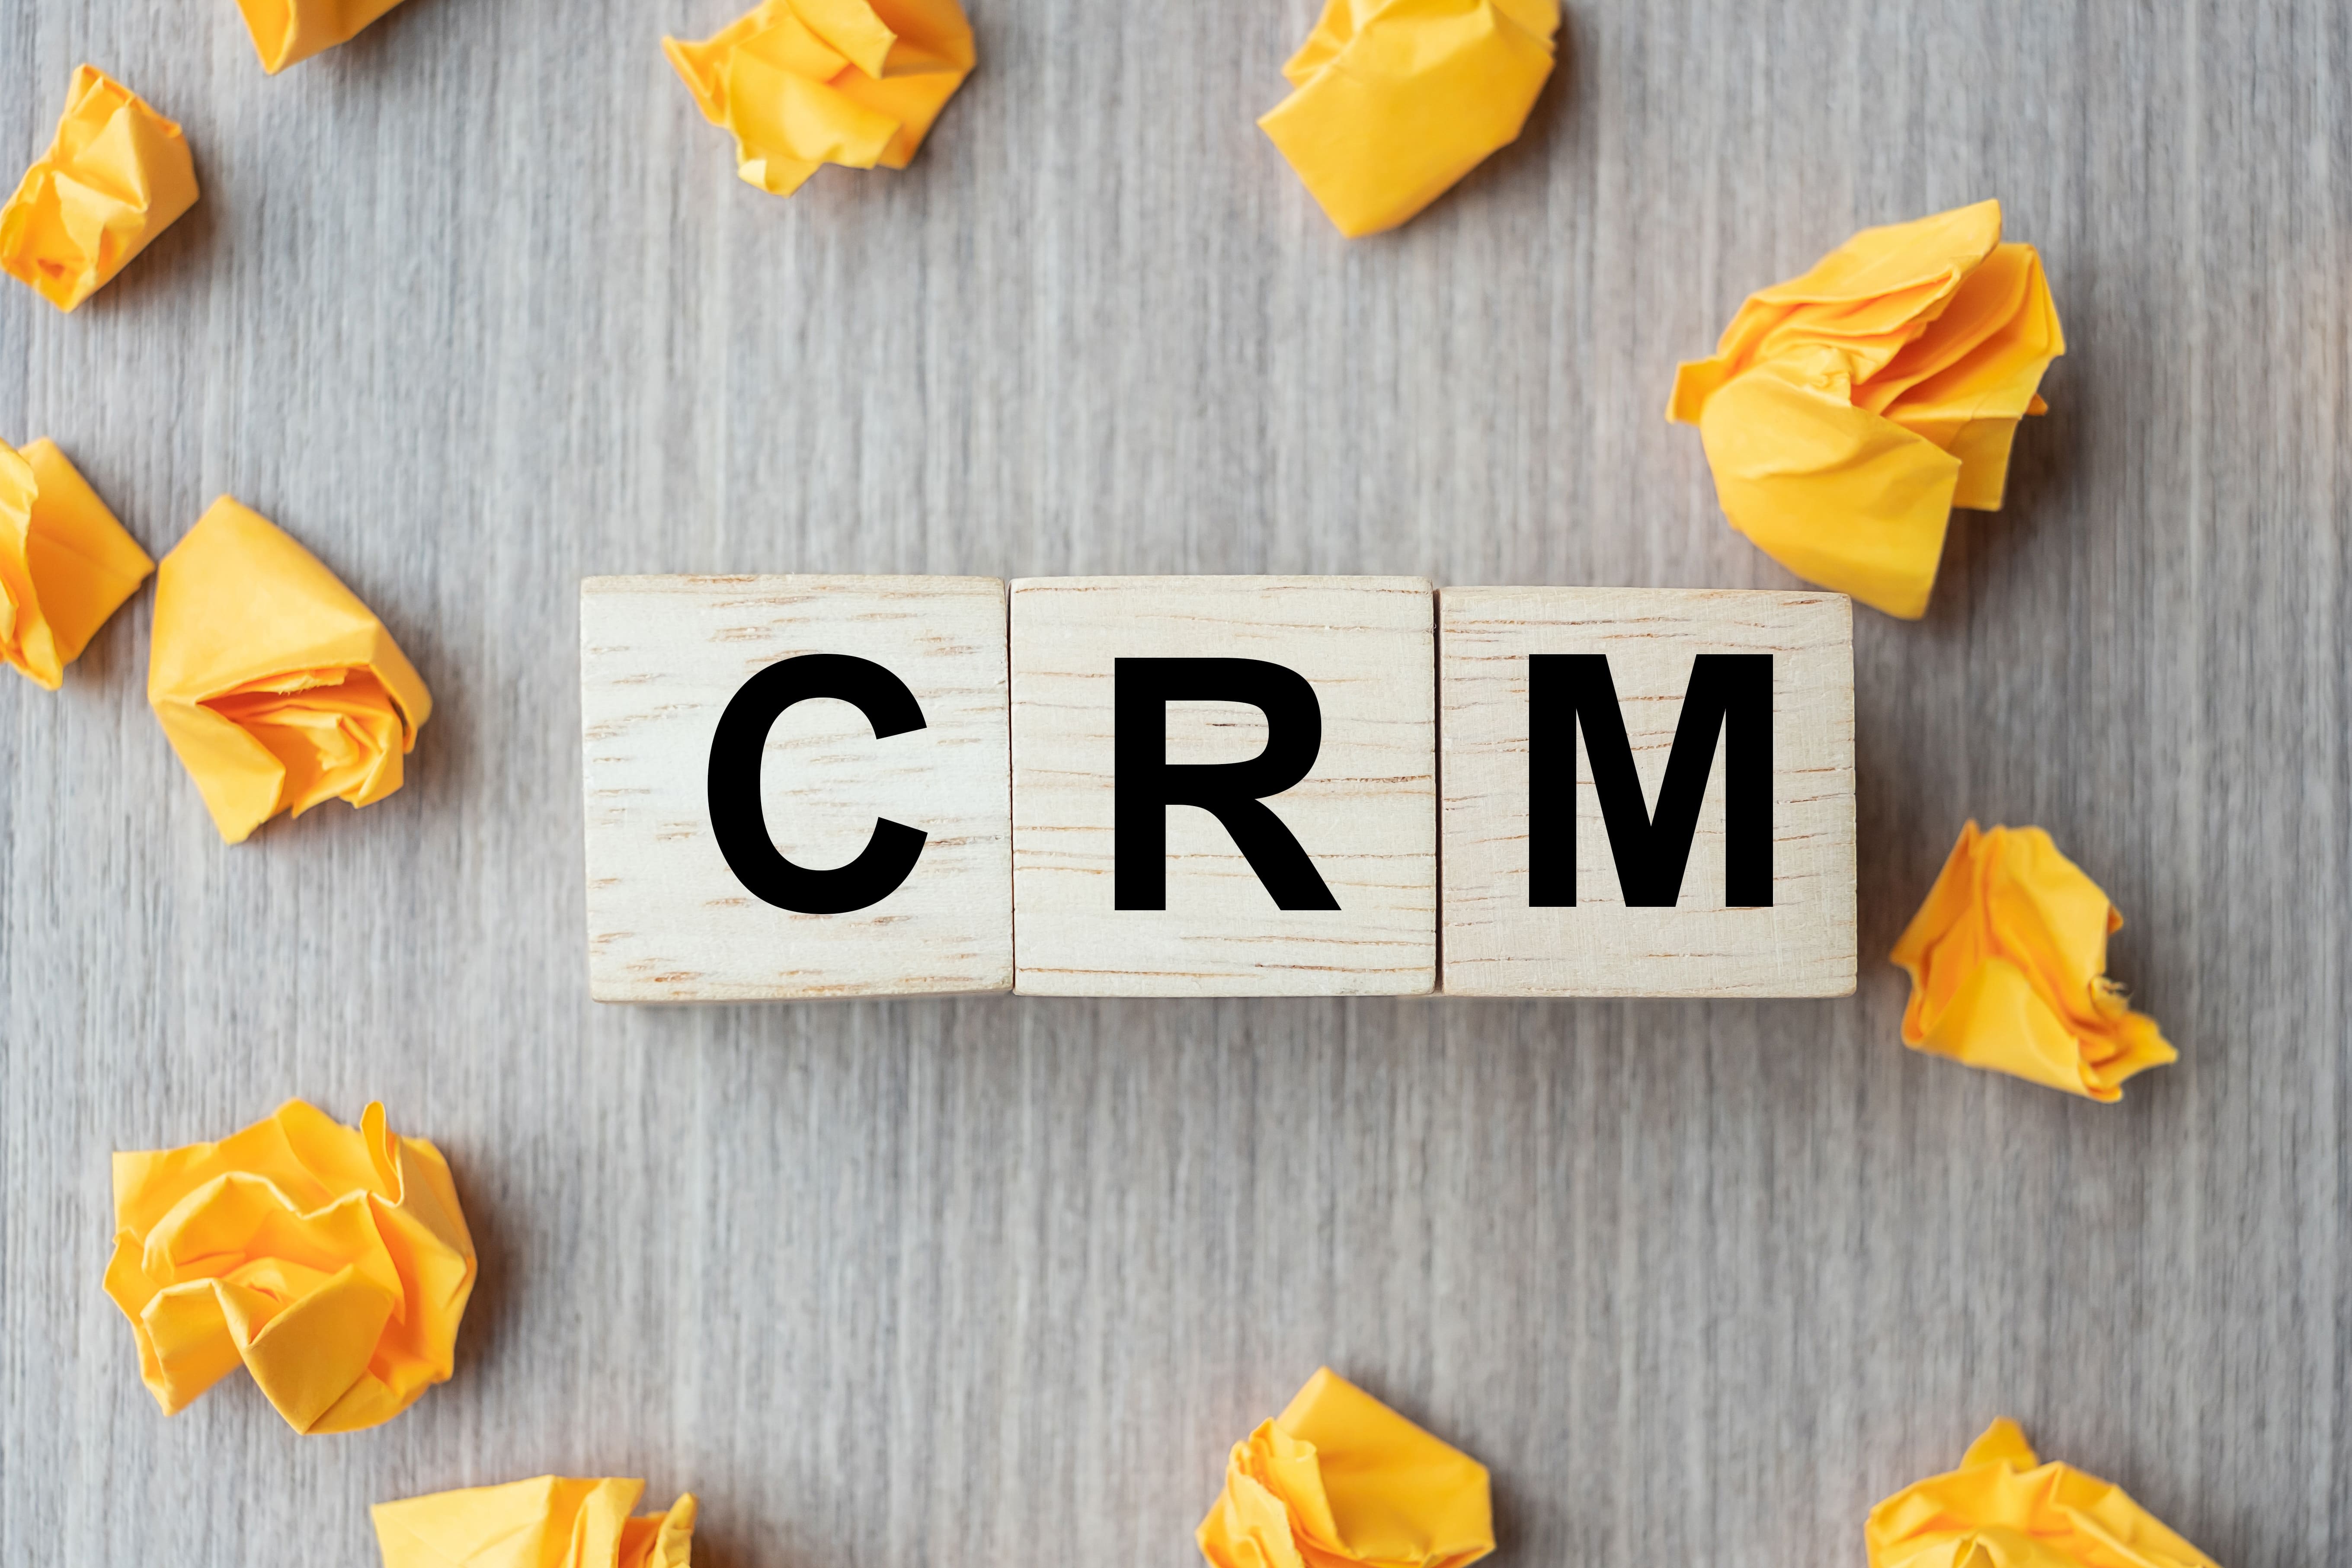 Do you need a CRM system for your company? Find out!